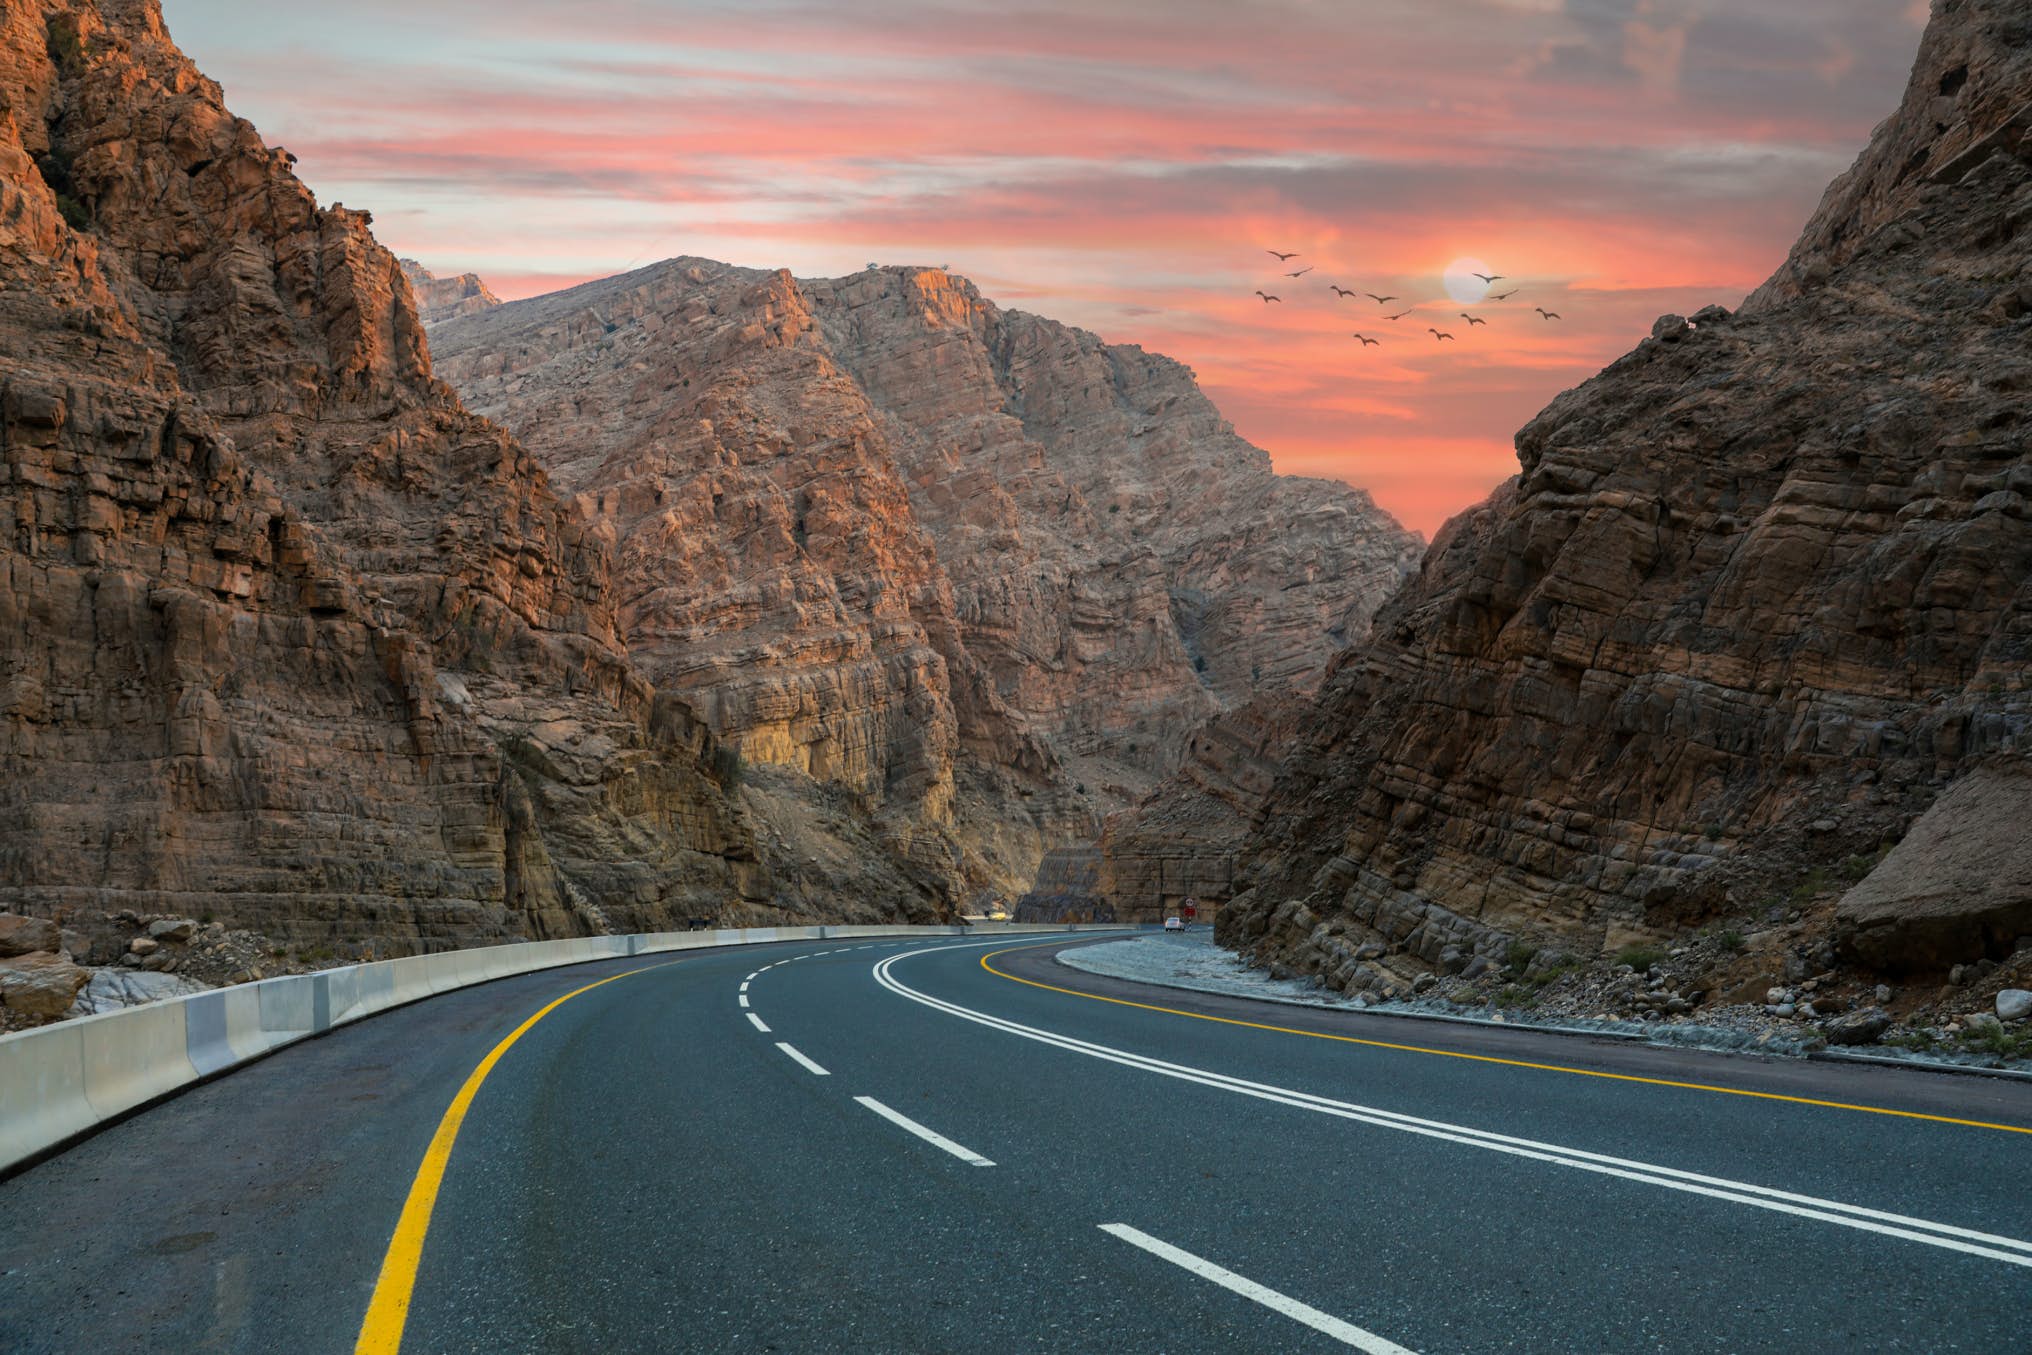 How To Spend A Day At Highest Mountain In UAE (Jebel Jais)